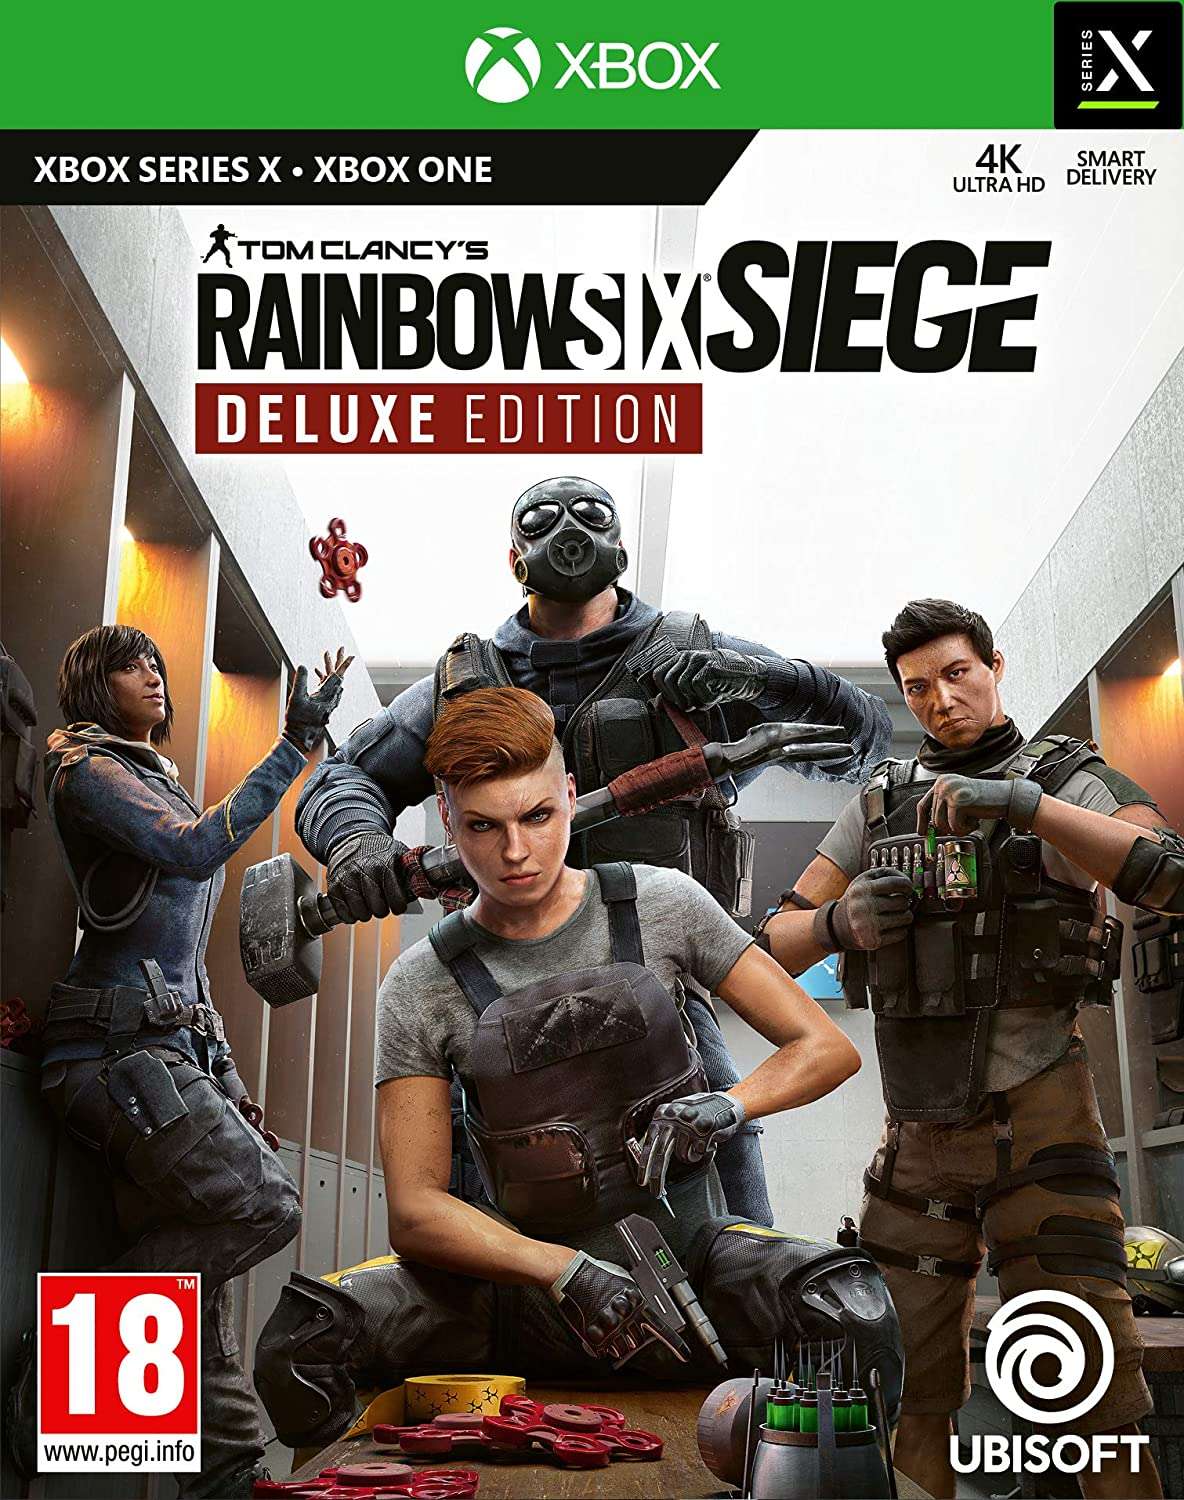 Tom Clancys Rainbow Six Siege Deluxe Edition for XBOXONE to buy